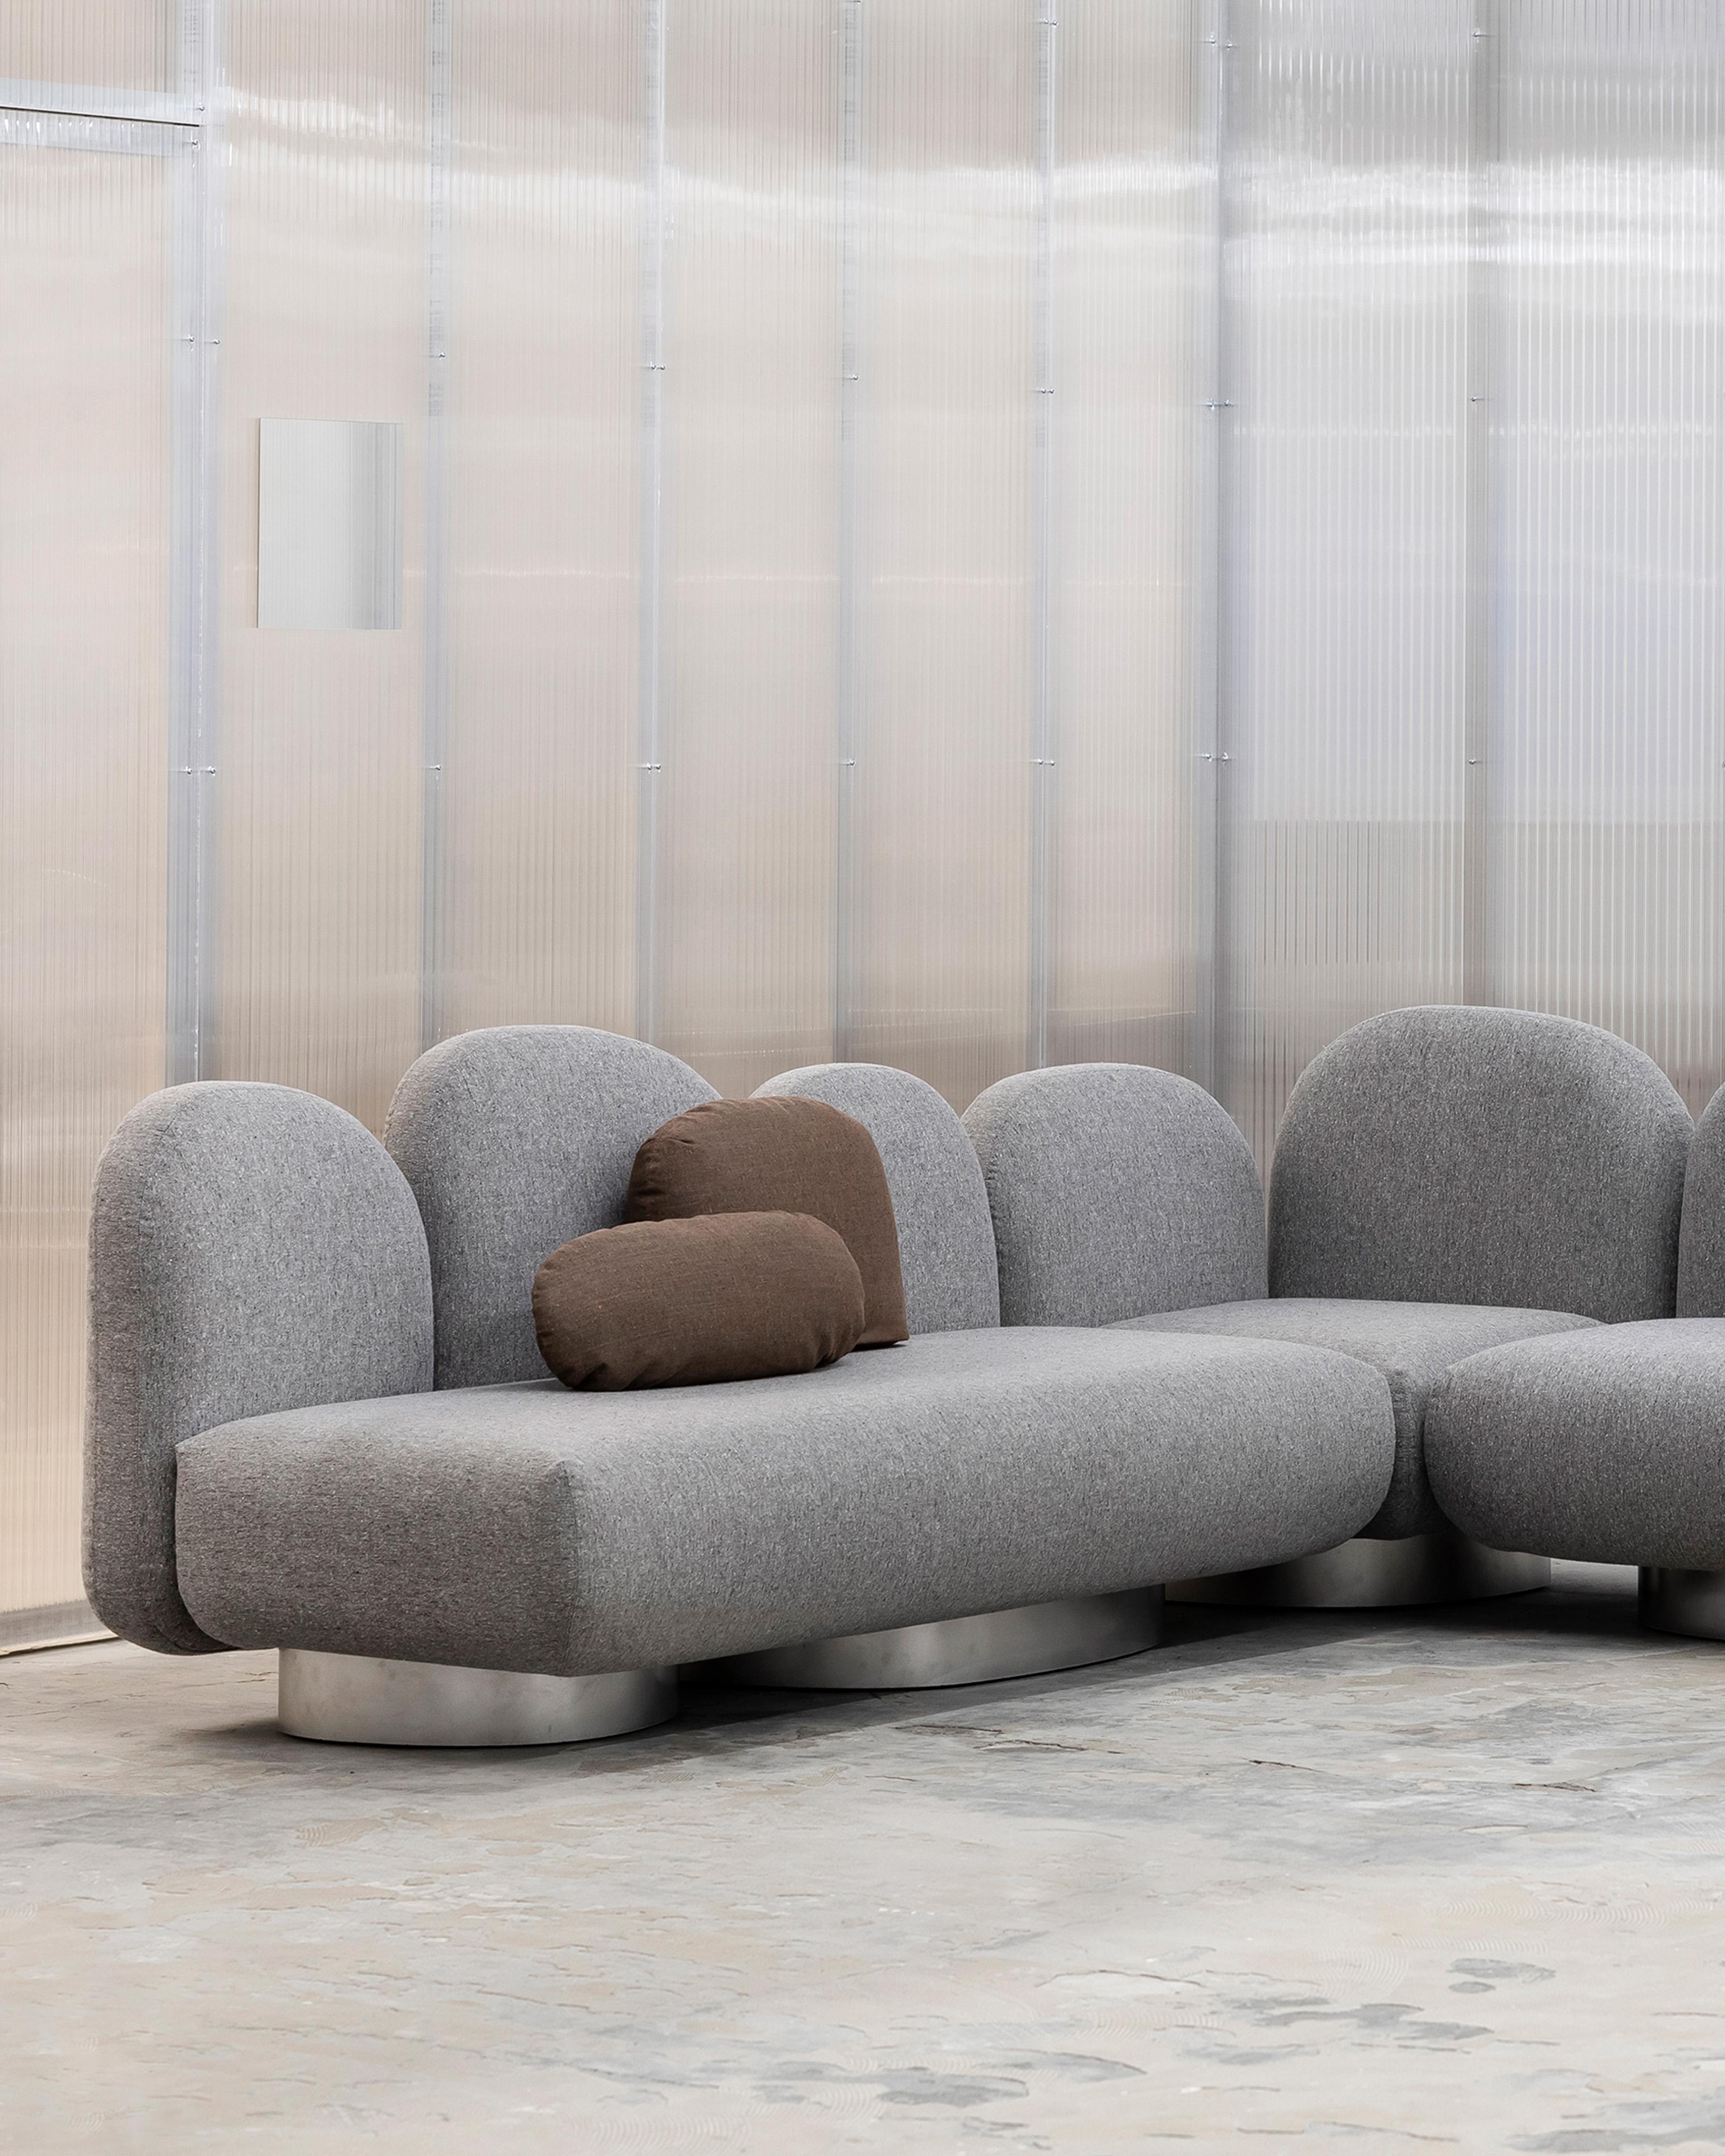 Aluminum Contemporary Sofa 'Assemble' by Destroyers/Builders, 1 seater + 2 armrests For Sale